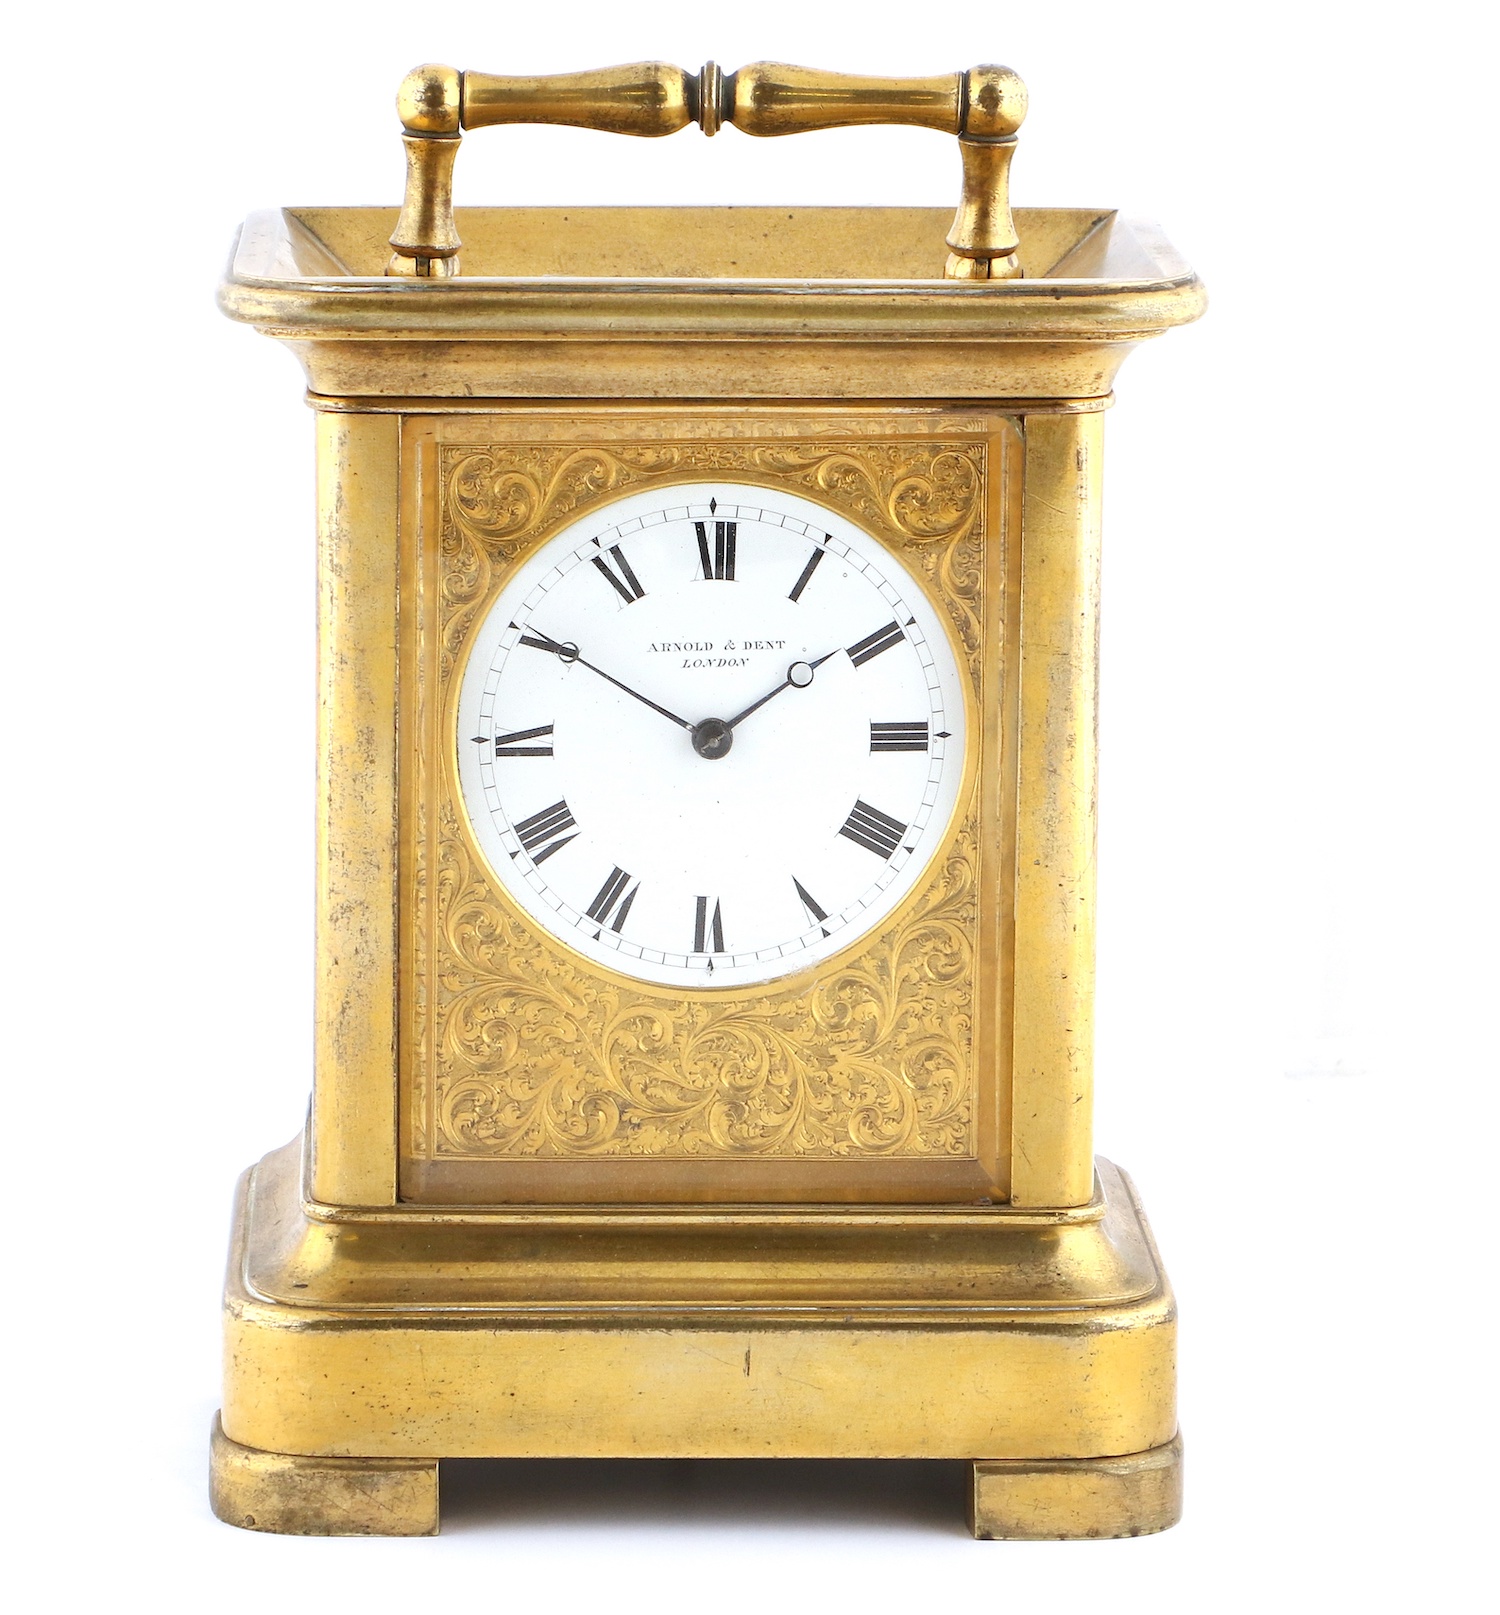 Giant Carriage Clock, signed Arnold & Dent